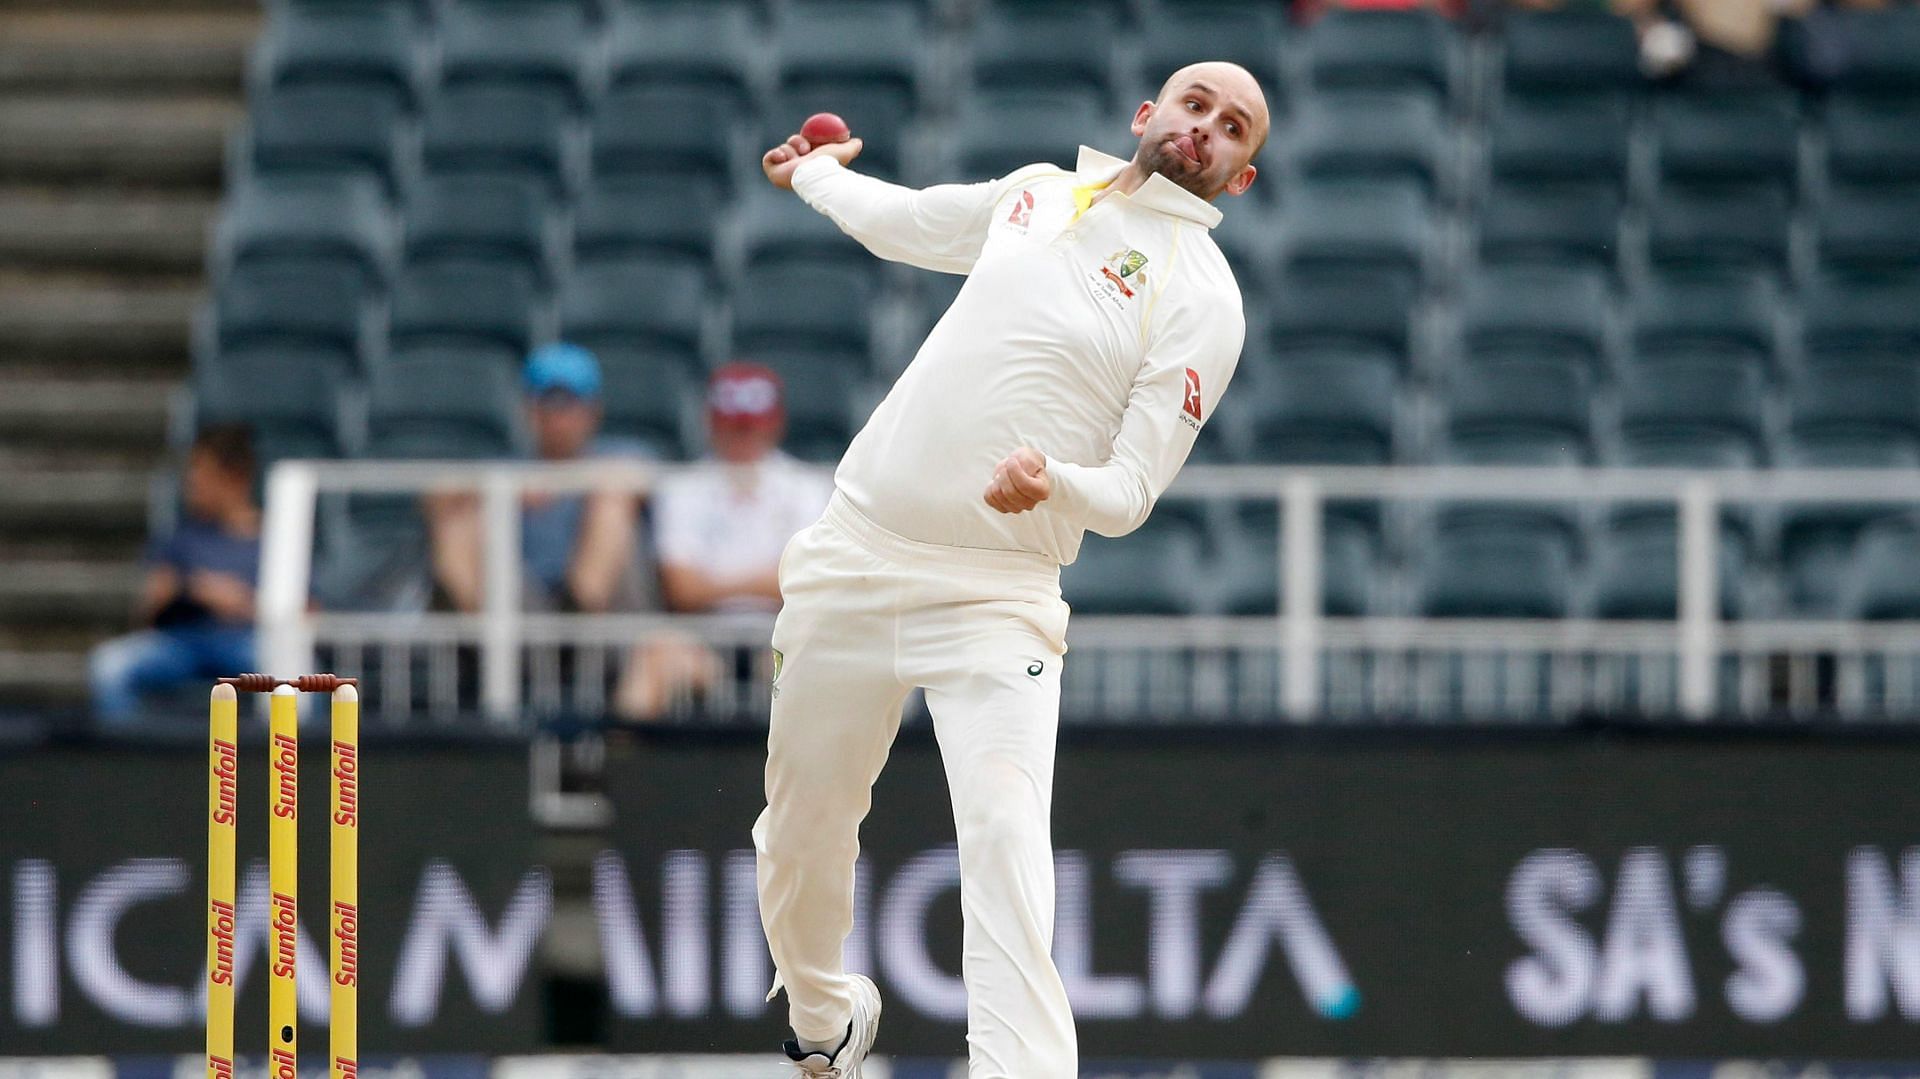 Nathan Lyon in action (Image Courtesy: ICC Cricket)